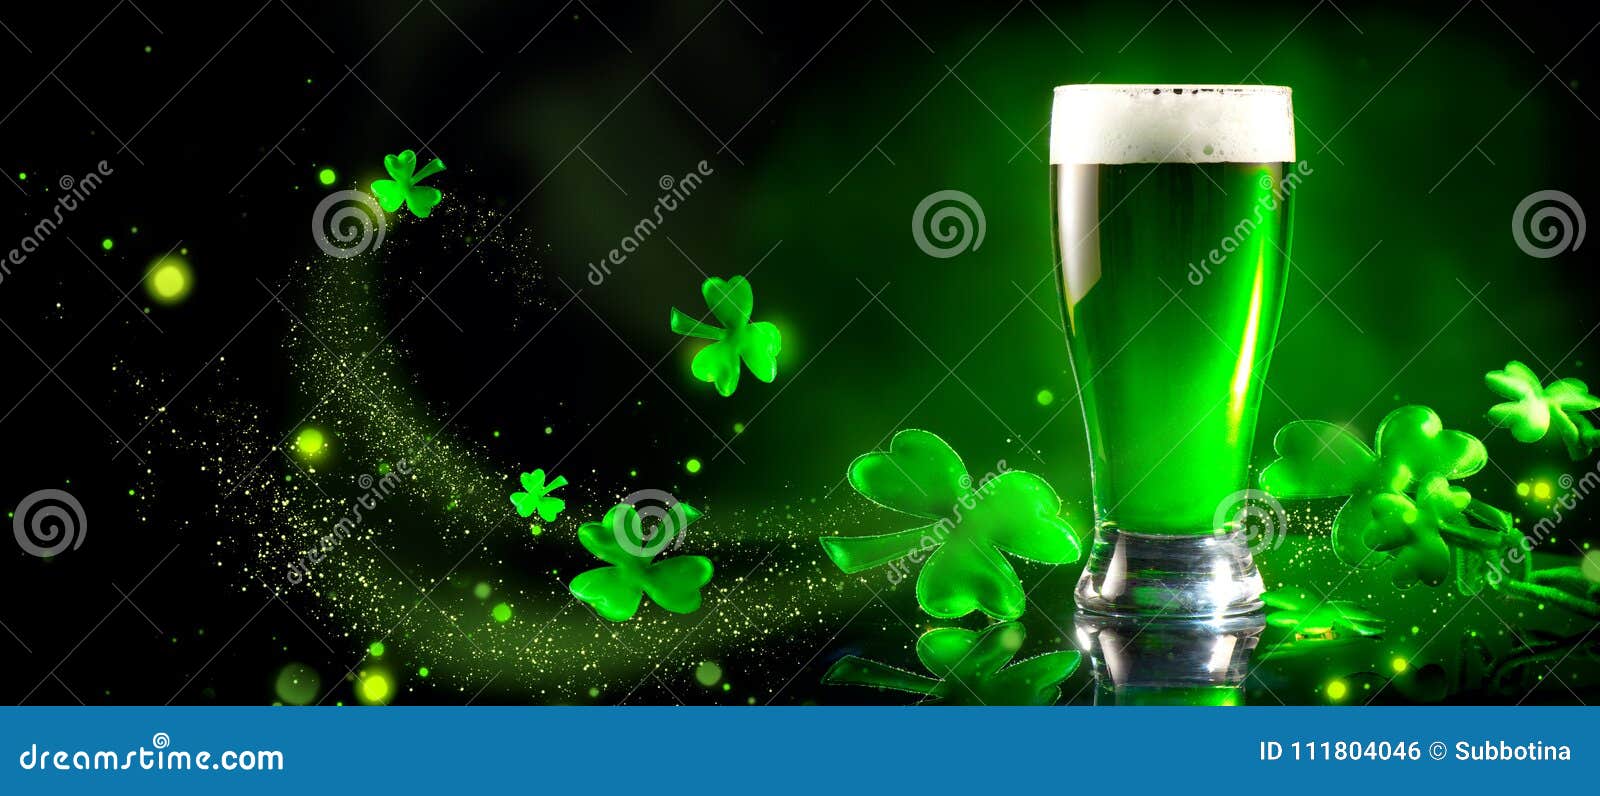 st. patrick`s day. green beer pint over dark green background, decorated with shamrock leaves